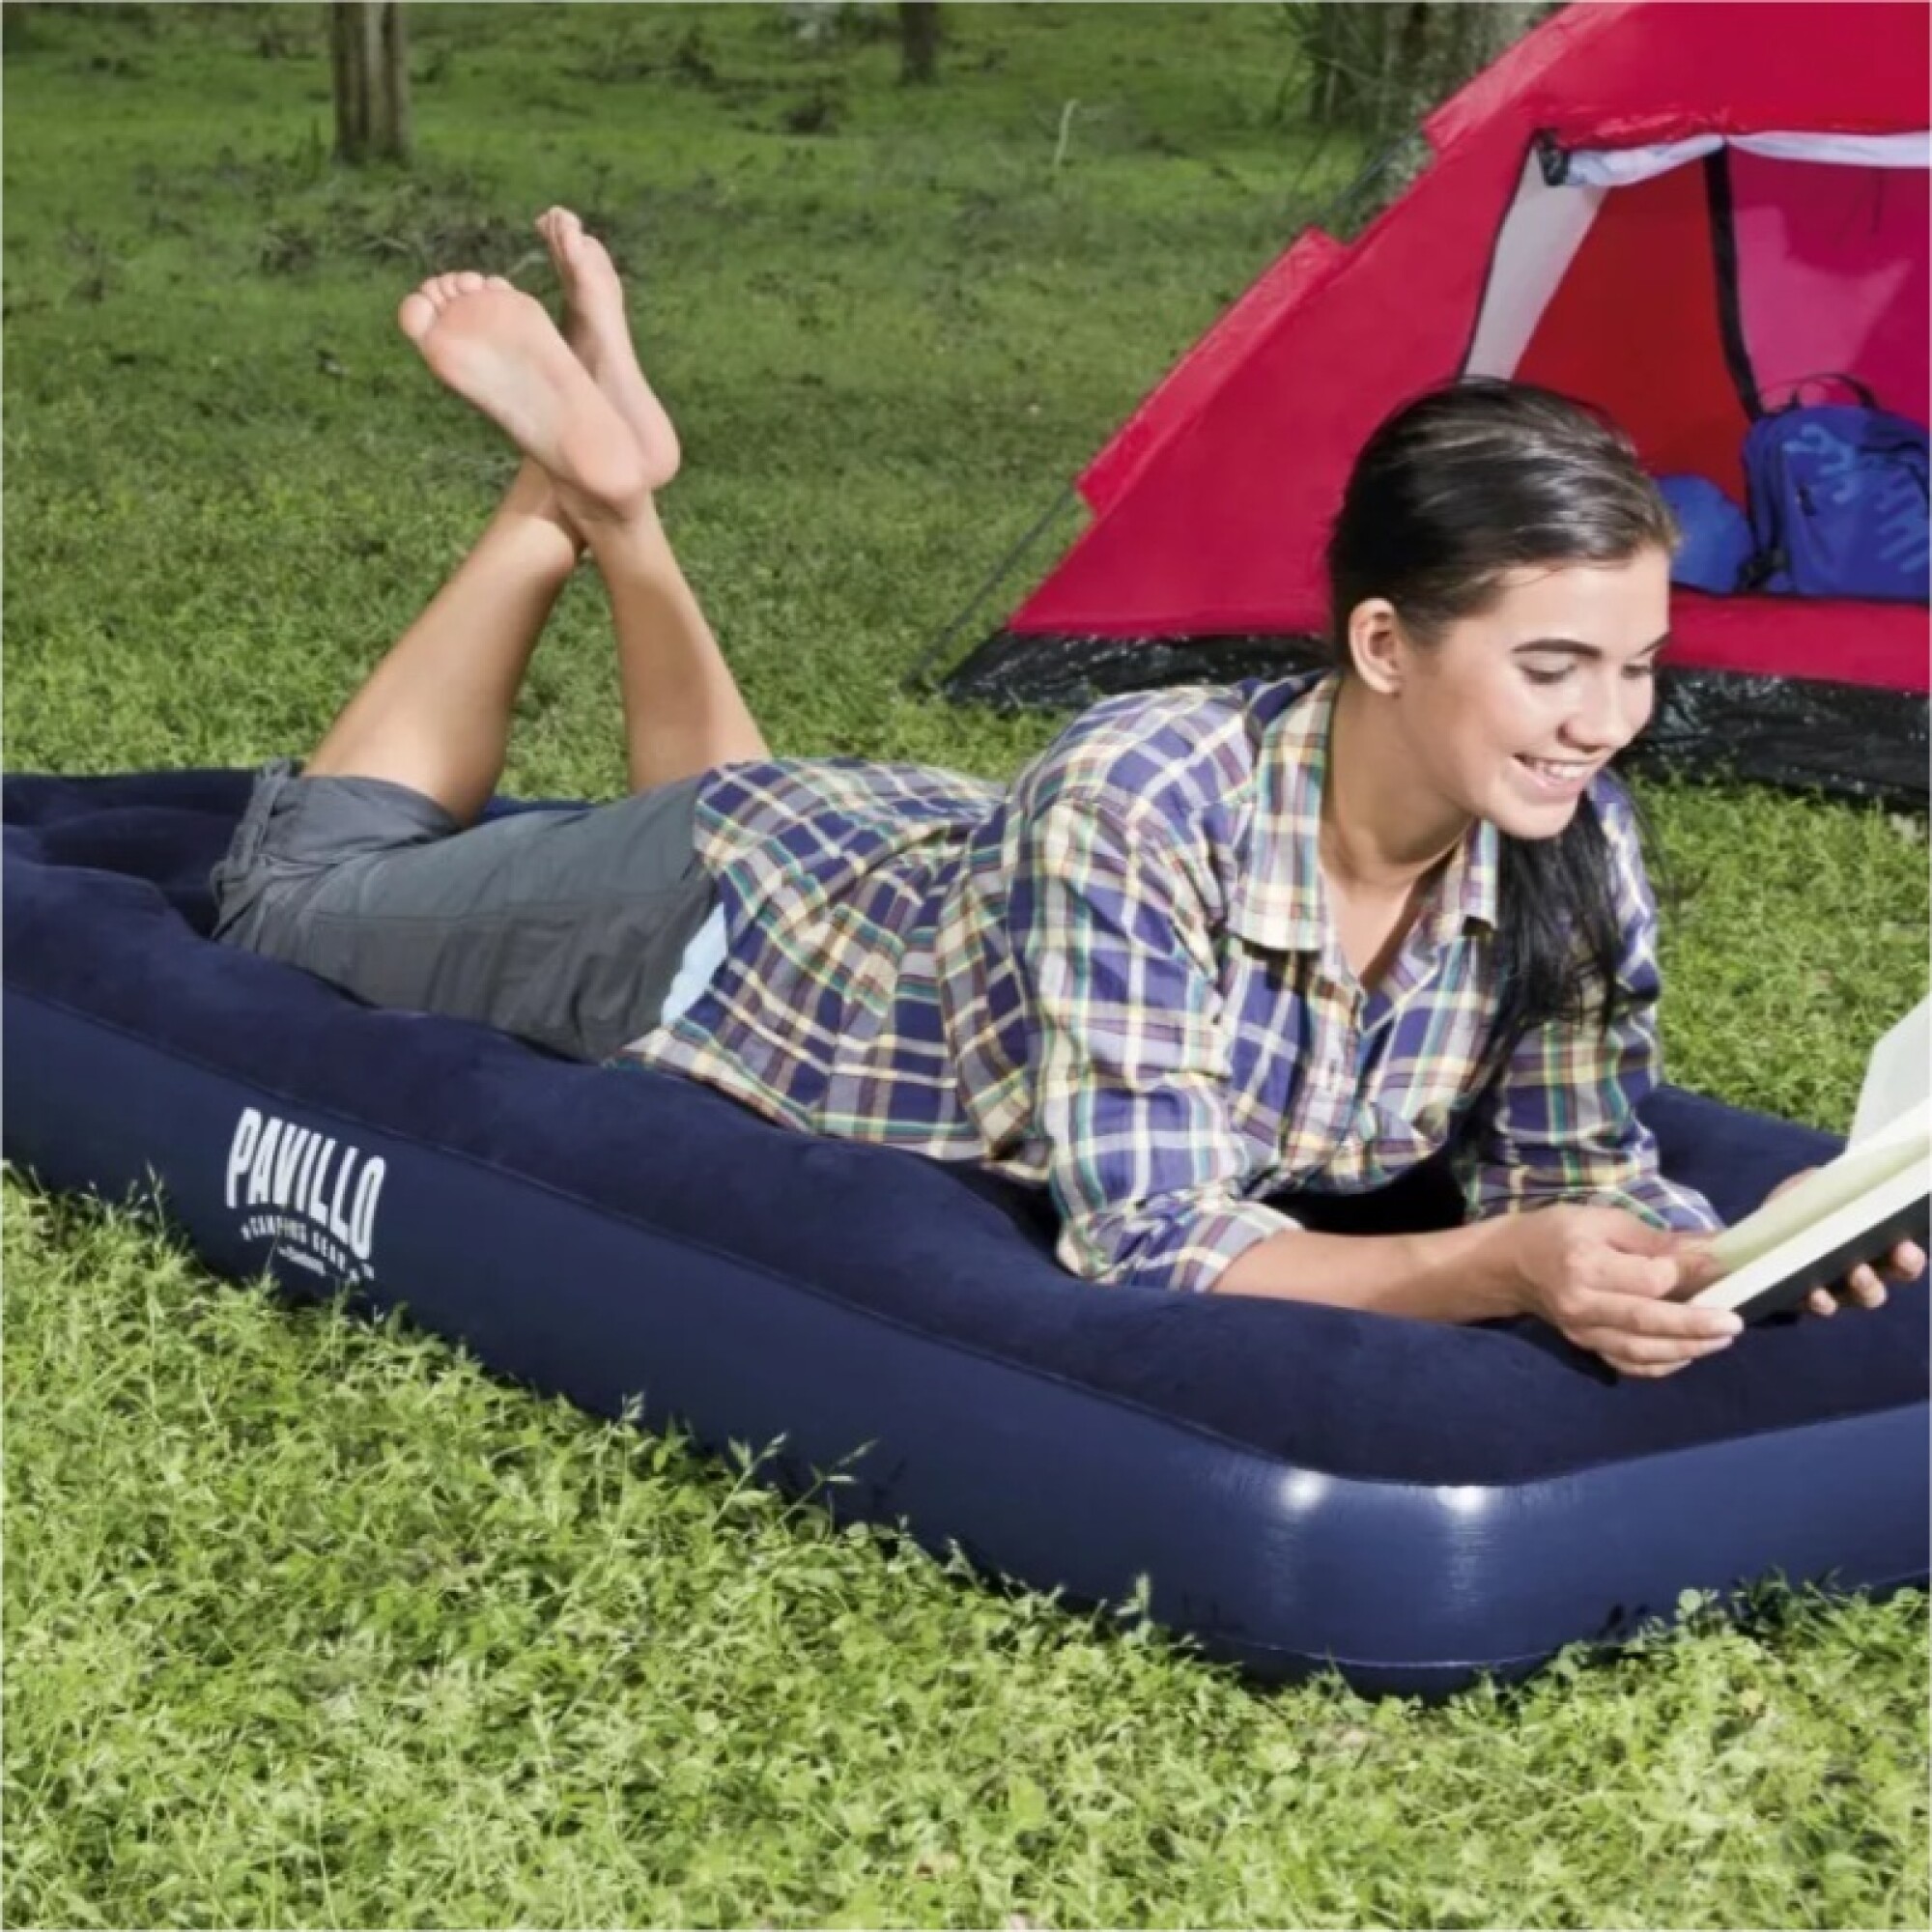 Colchón Inflable 1 Plaza Pavillo Camping Gear 67000 - BESTWAY — Mulata  Muebles